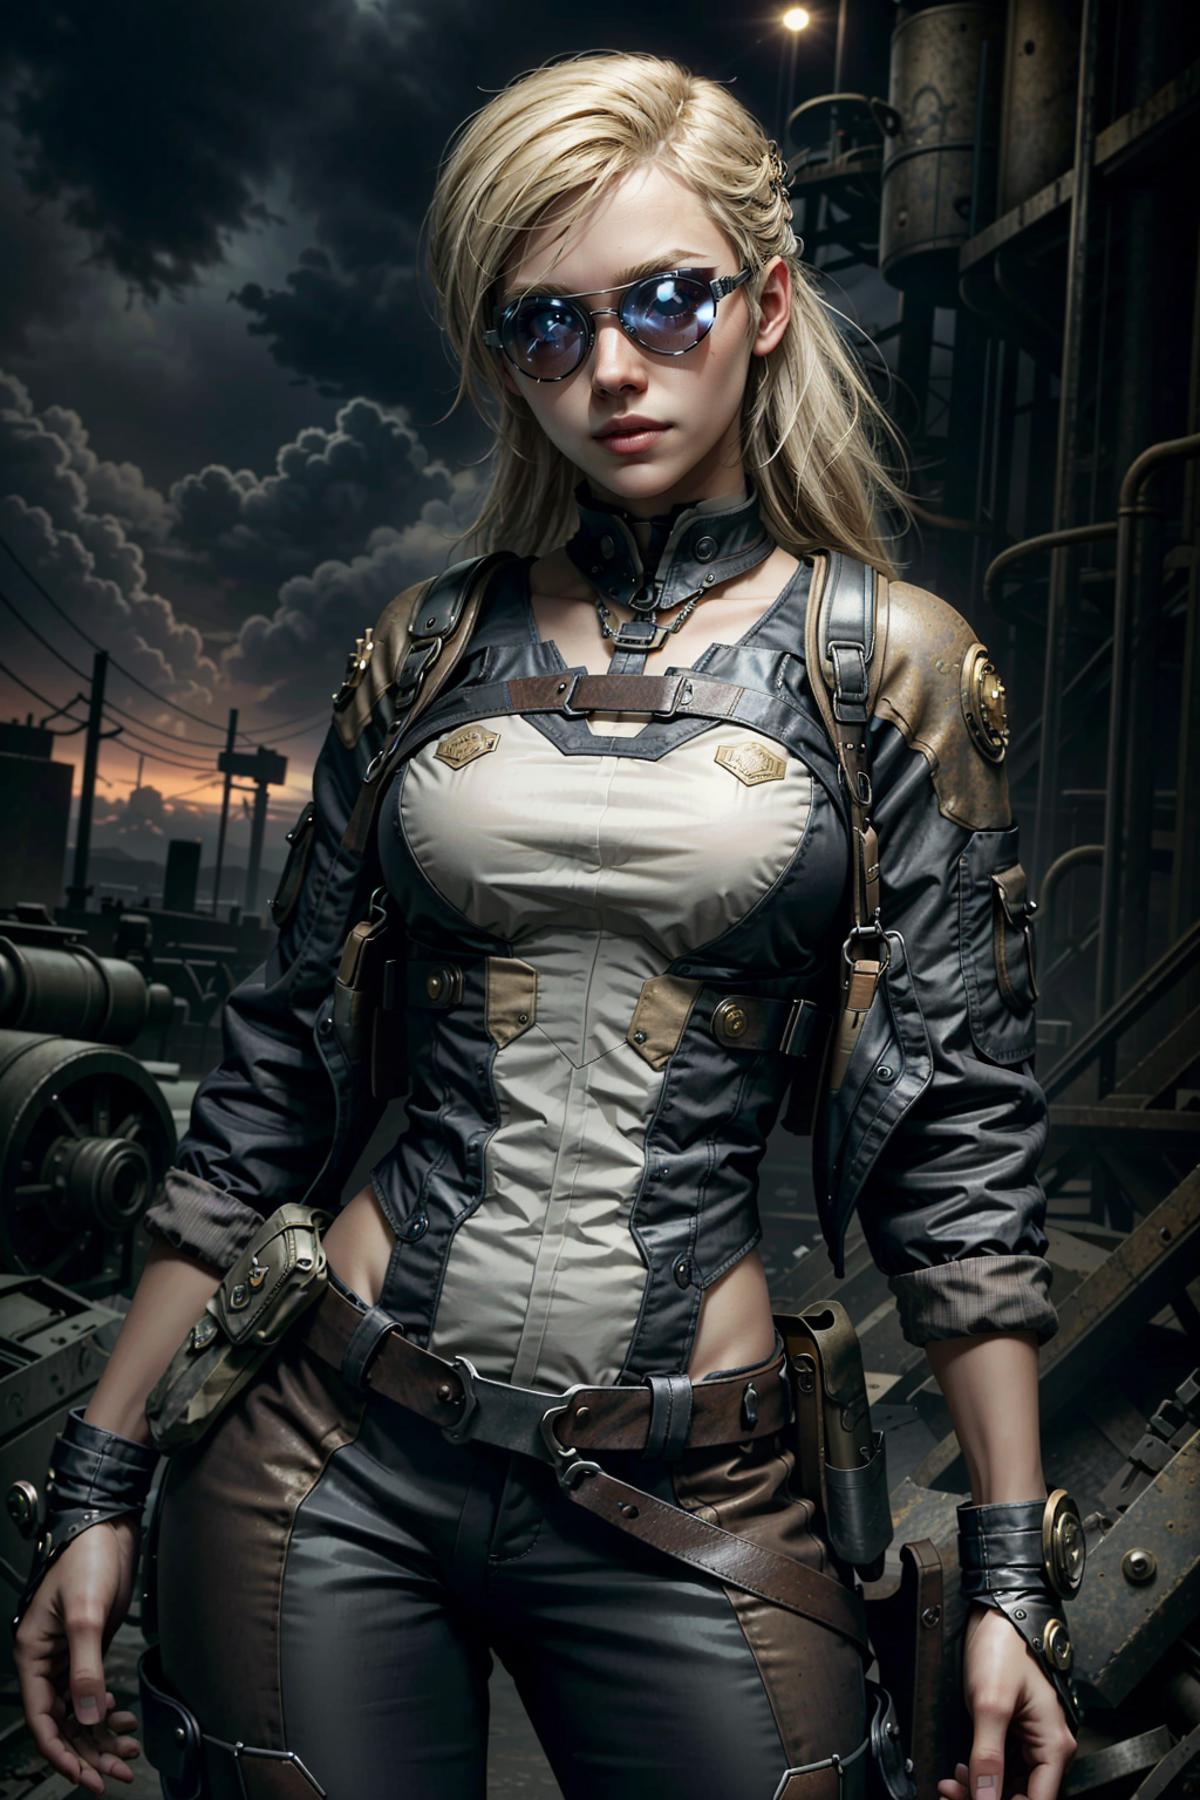 Cassie Cage from Mortal Kombat image by BloodRedKittie